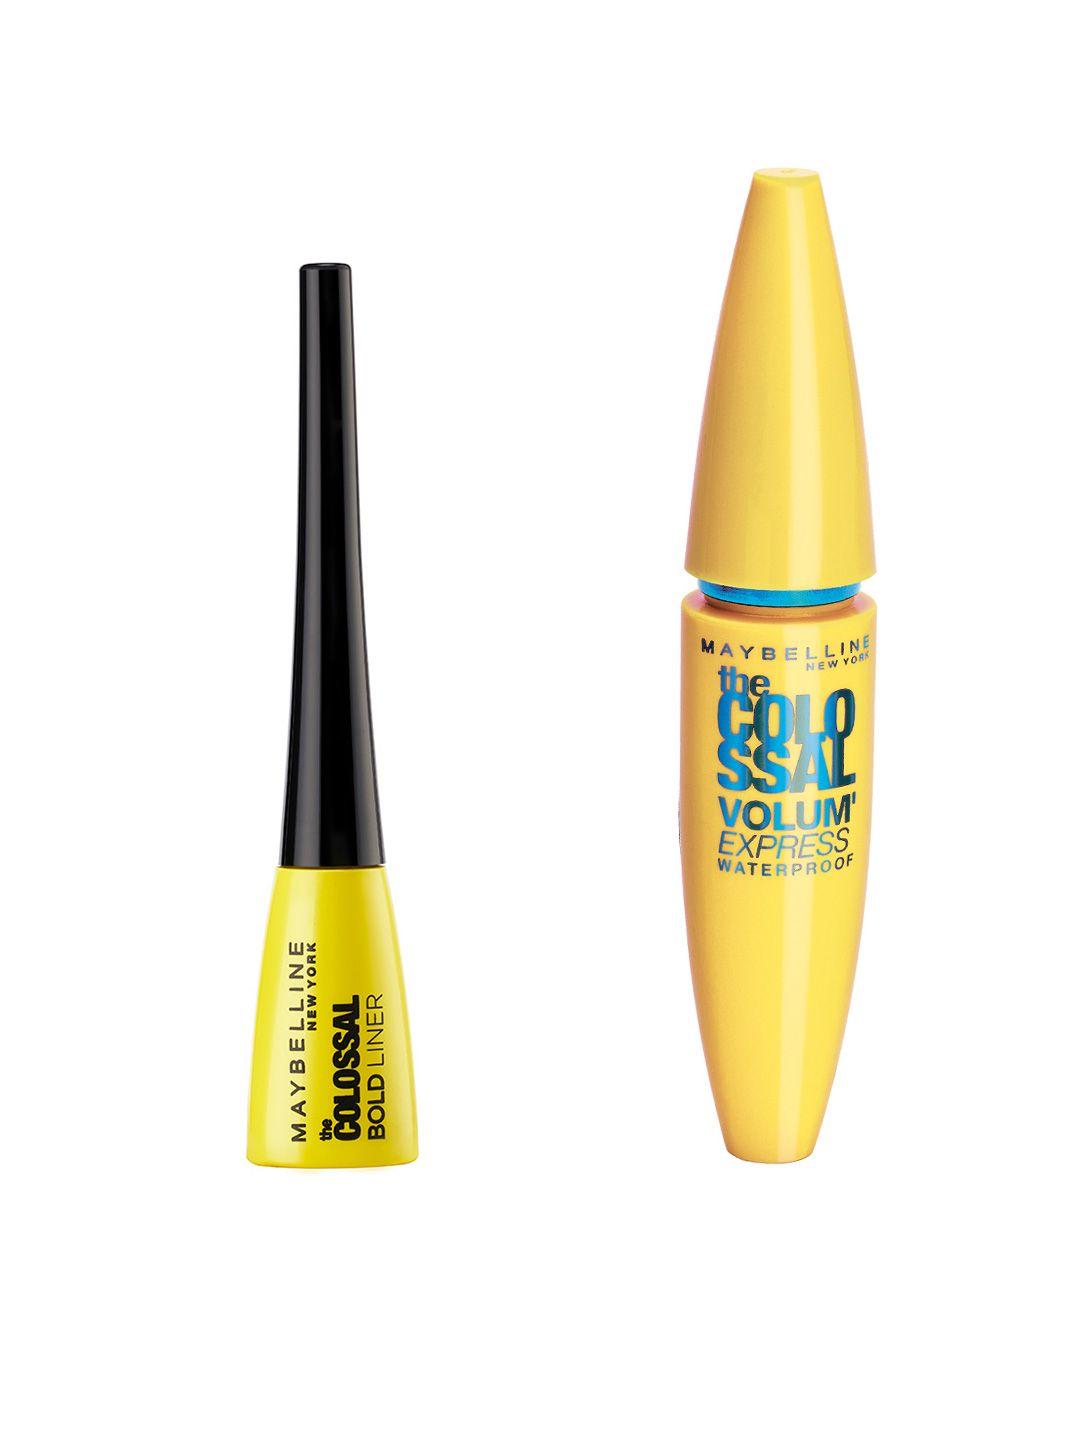 maybelline set of colossal bold liner & colossal volume express waterproof mascara